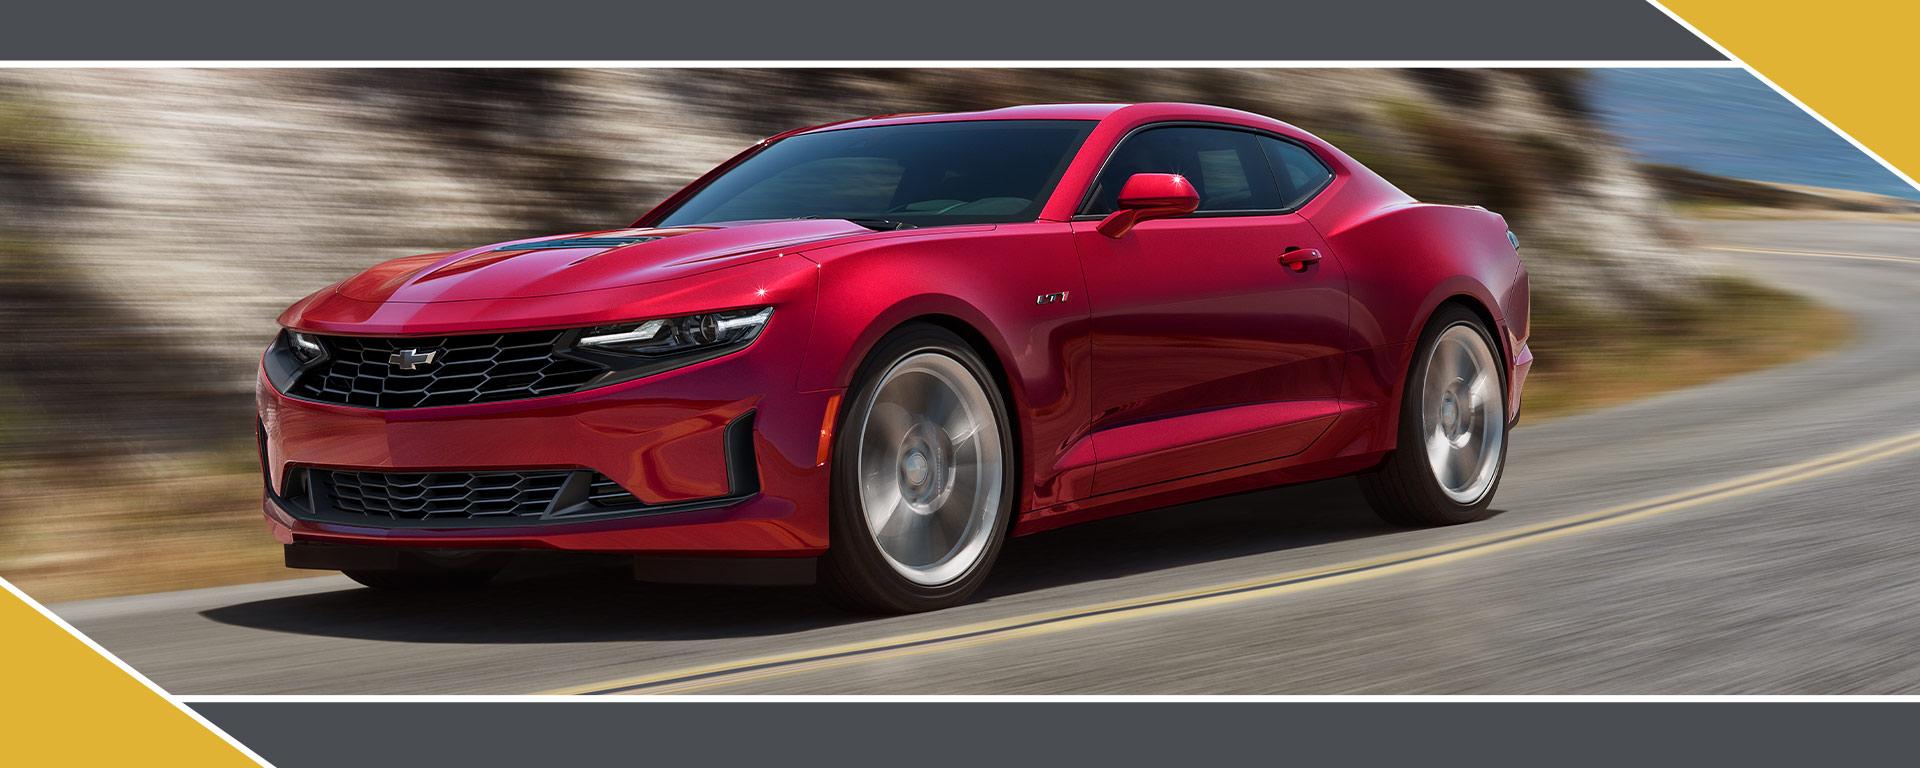 2021 Chevrolet Camaro 2SS Coupe 62L V8 DI 6Speed Manual Transmission   YouTube